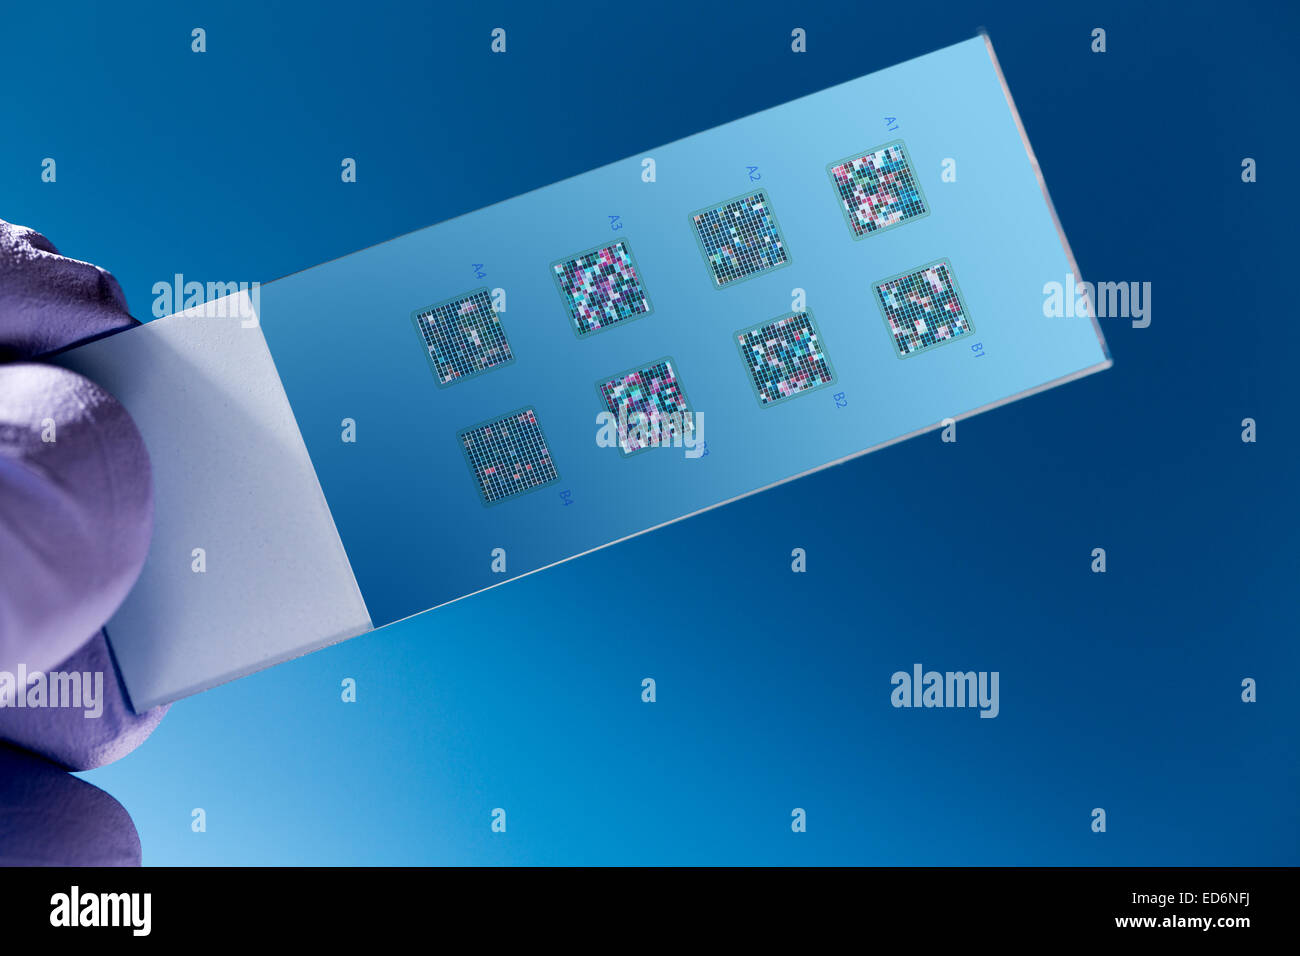 DNA microarray, DNA chip or biochip,  array of nano DNA spots attached to a glass surface to measure  levels of large numbers of Stock Photo